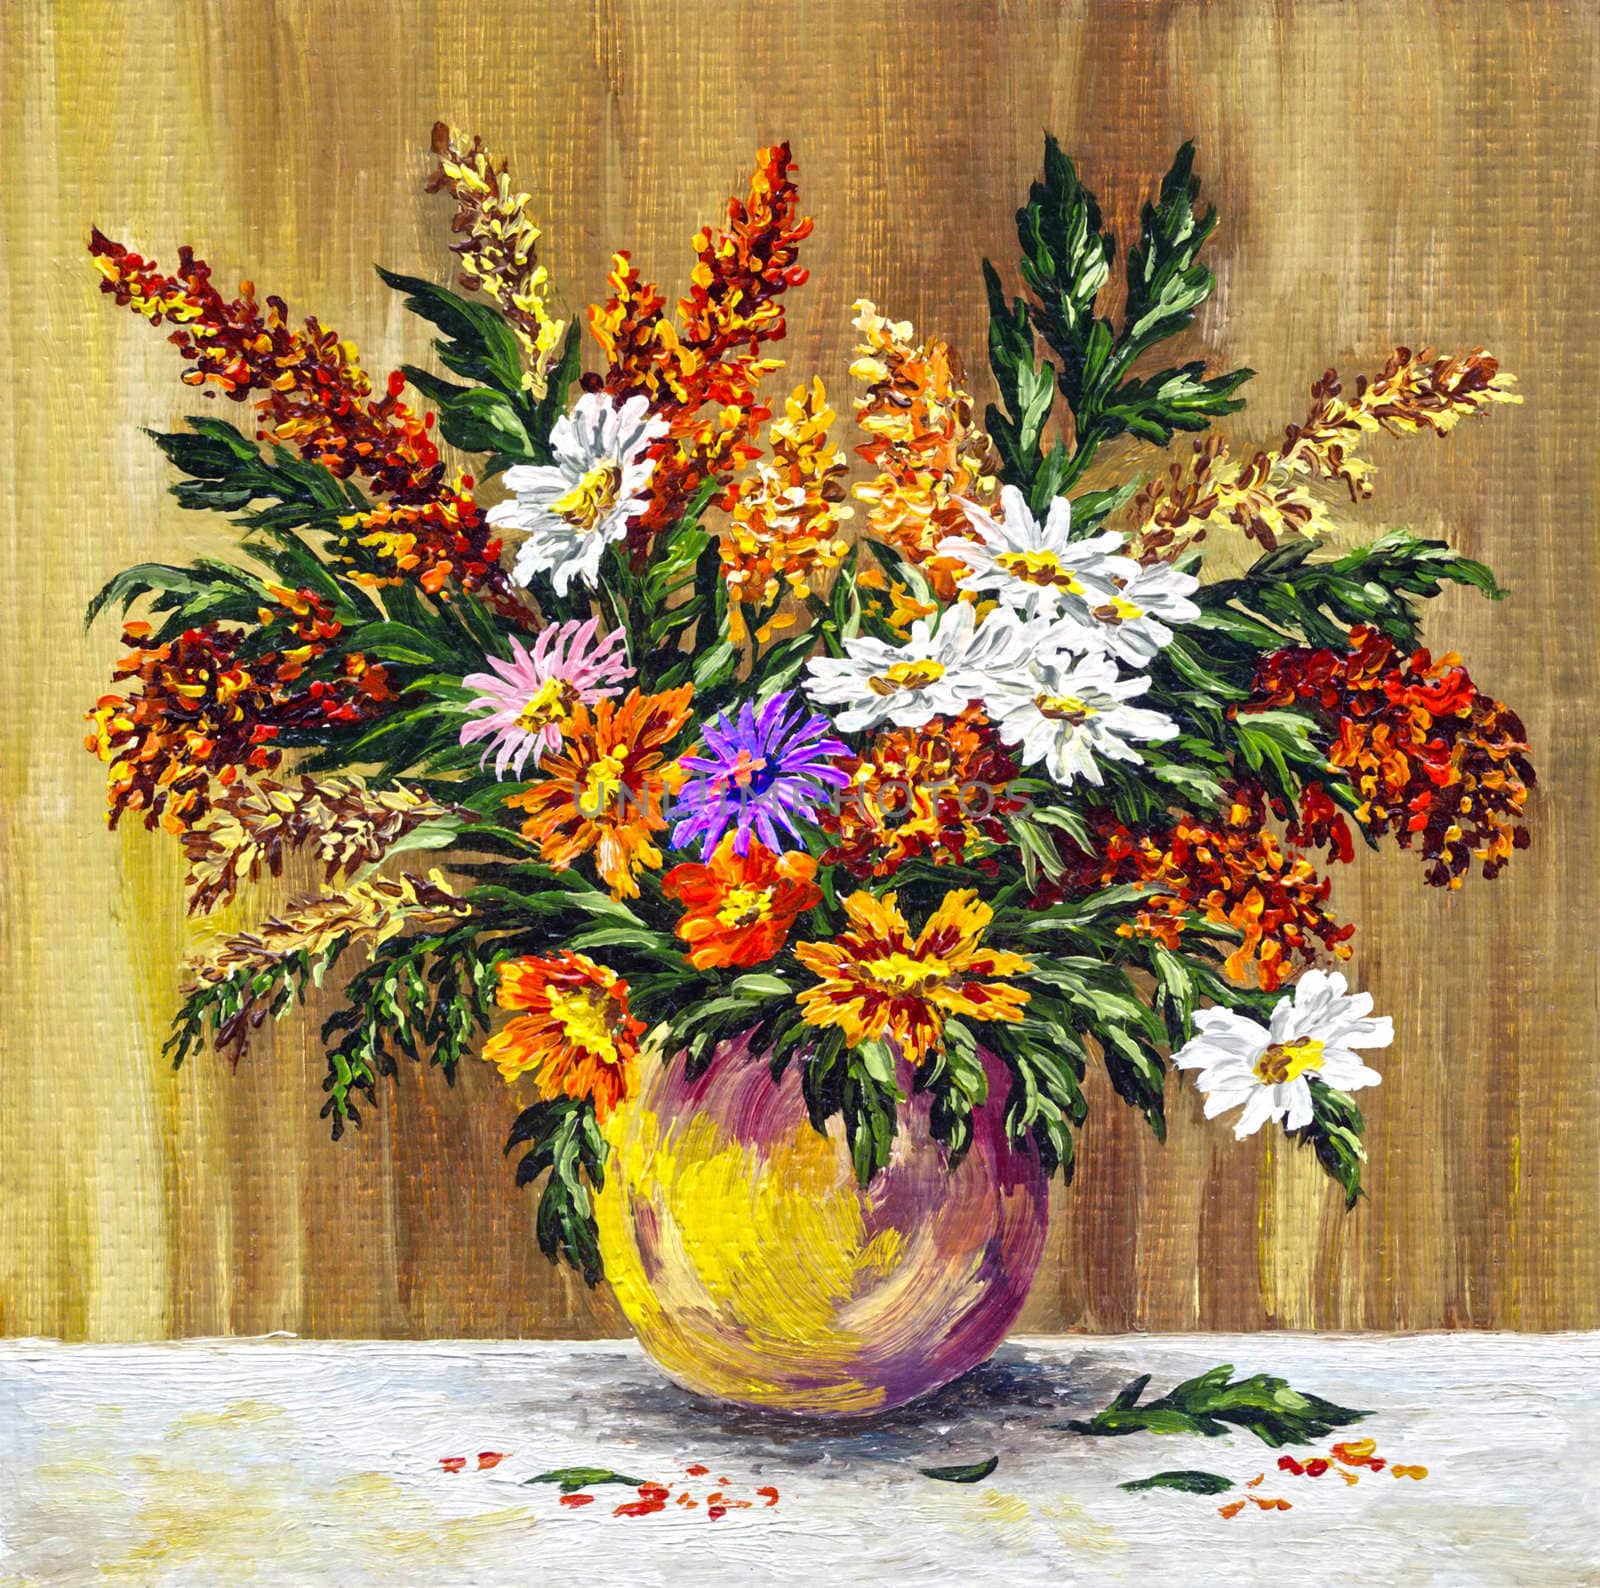 Picture oil paints on a canvas: bouquet of wild flowers in a clay pot